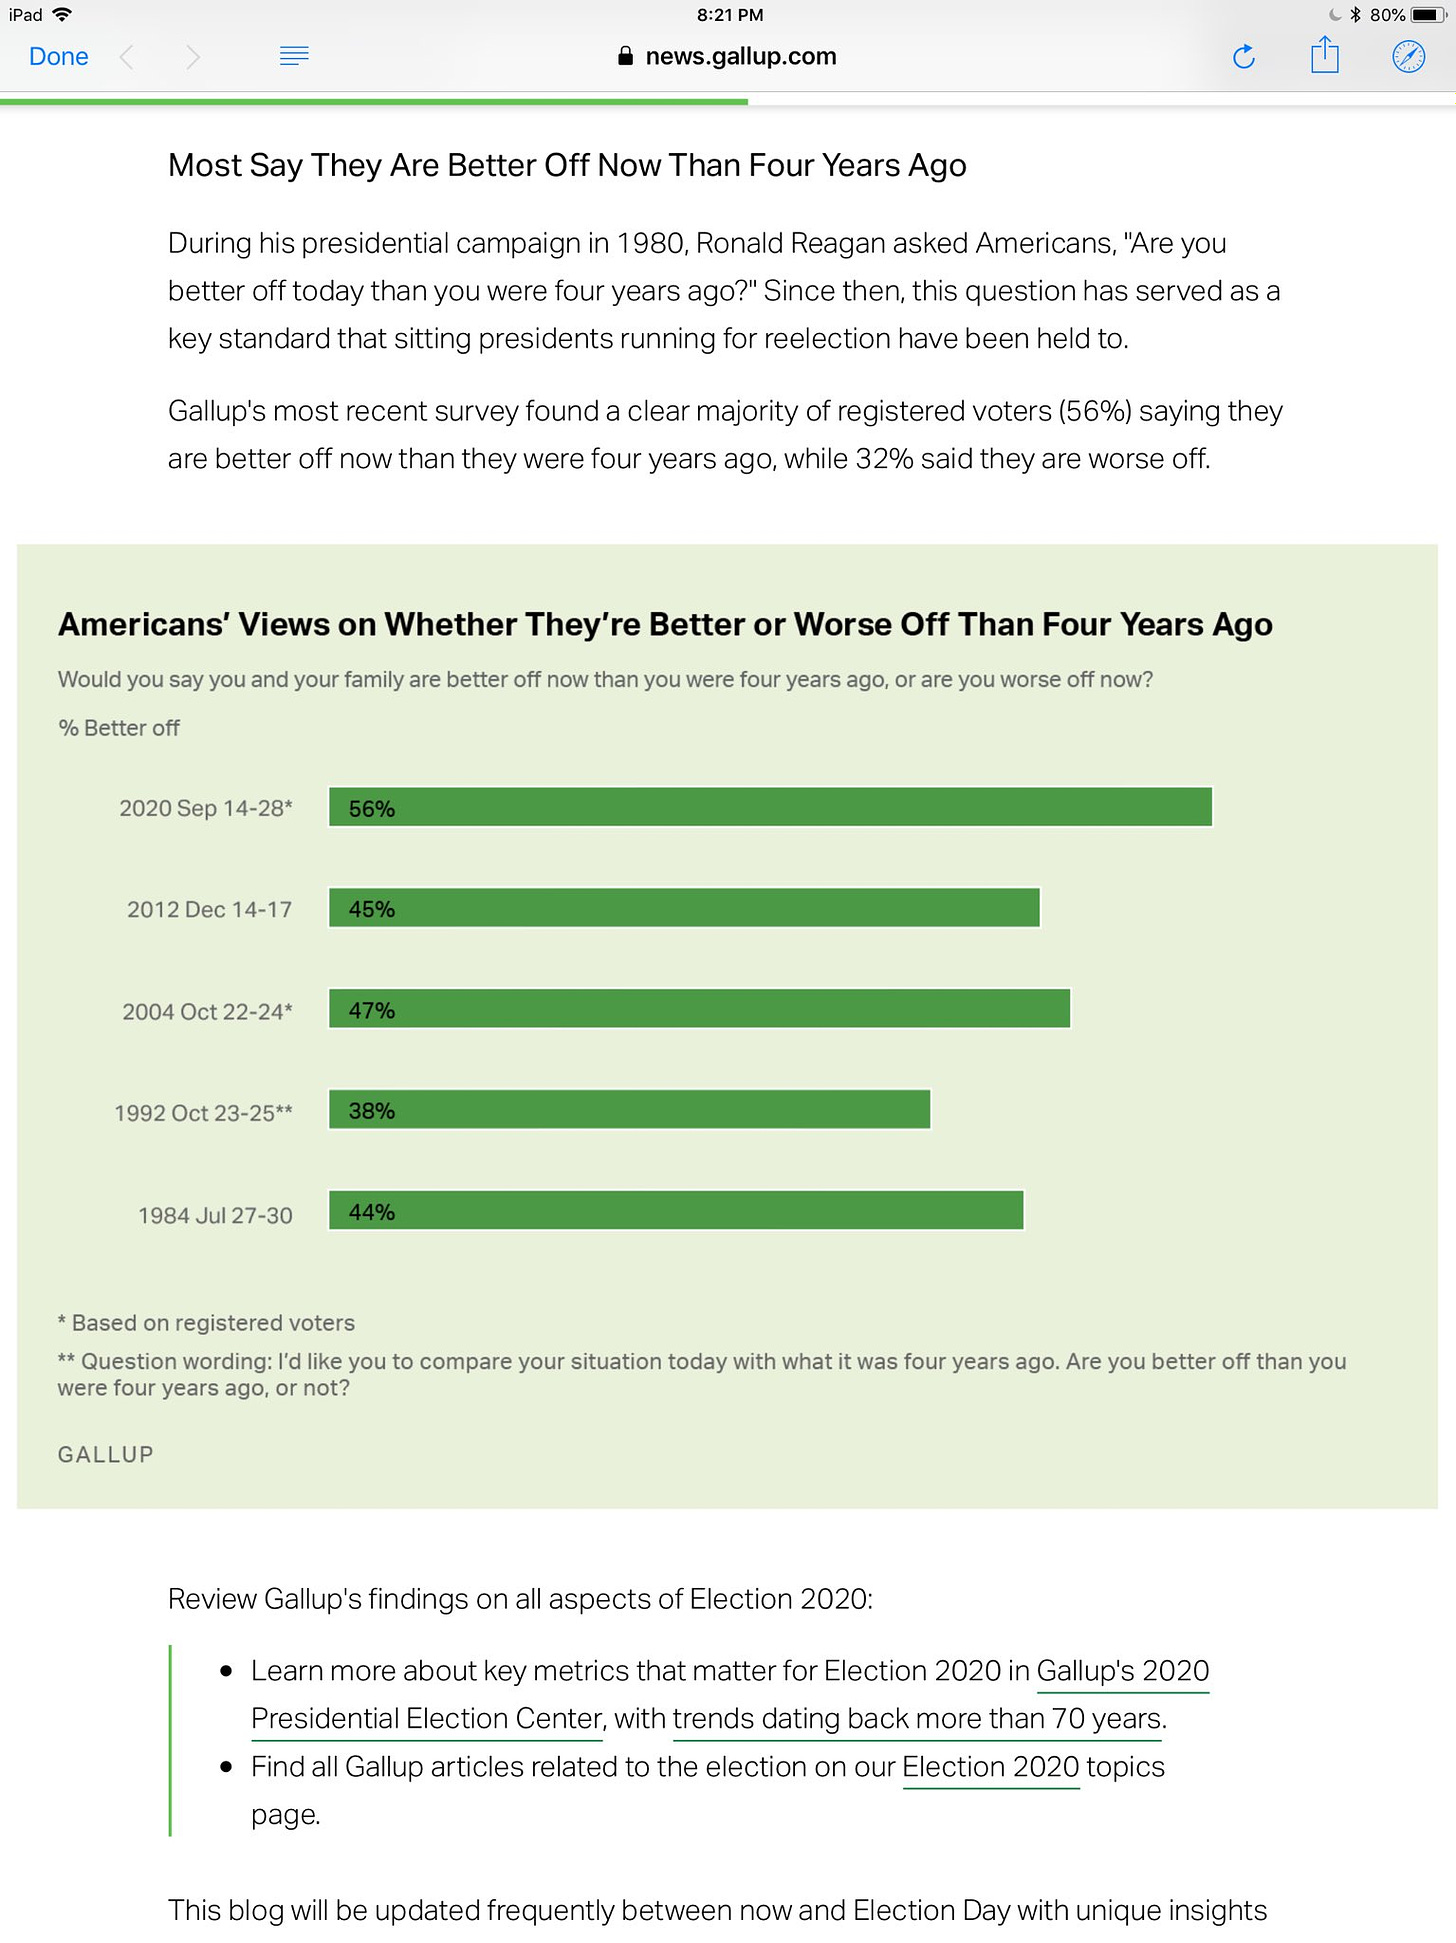 Gallup Poll reveals most Americans believe they&rsquo;re better off now than four years ago. First time ever.